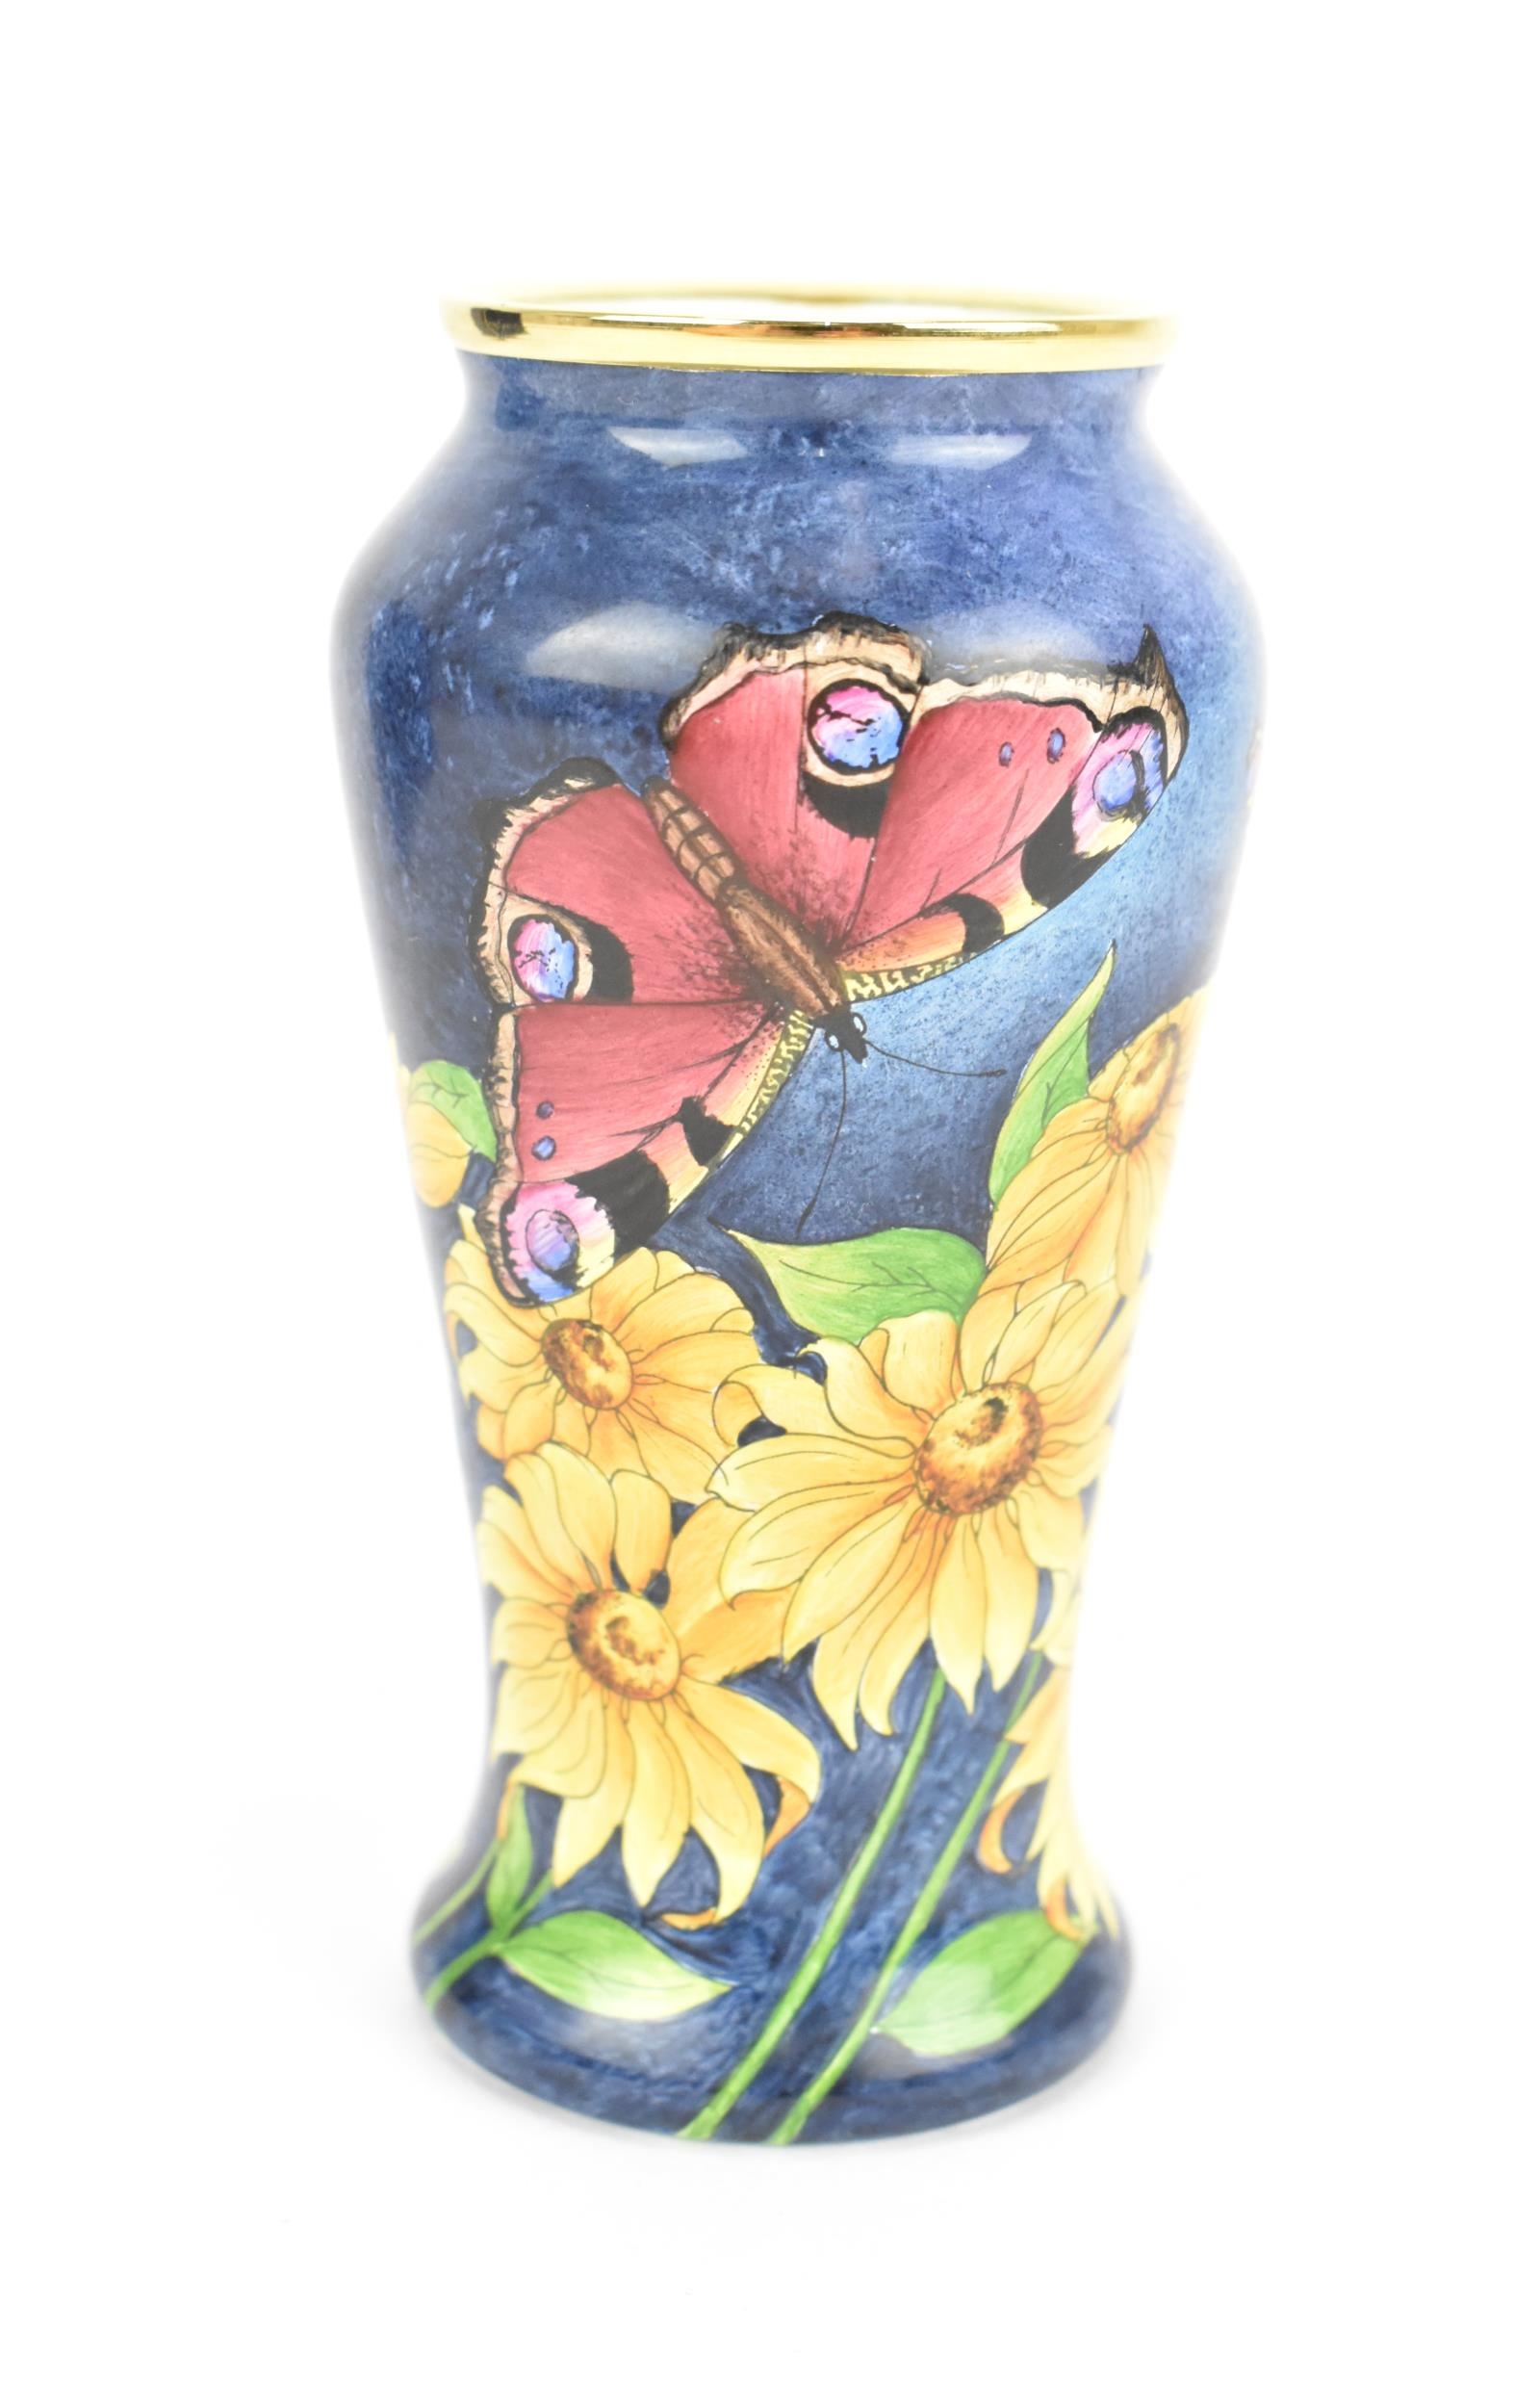 A Moorcroft enamels 'Papillon' vase designed by Rachel Bishop, painted by Fiona Bakewell, 2002, of - Image 2 of 6